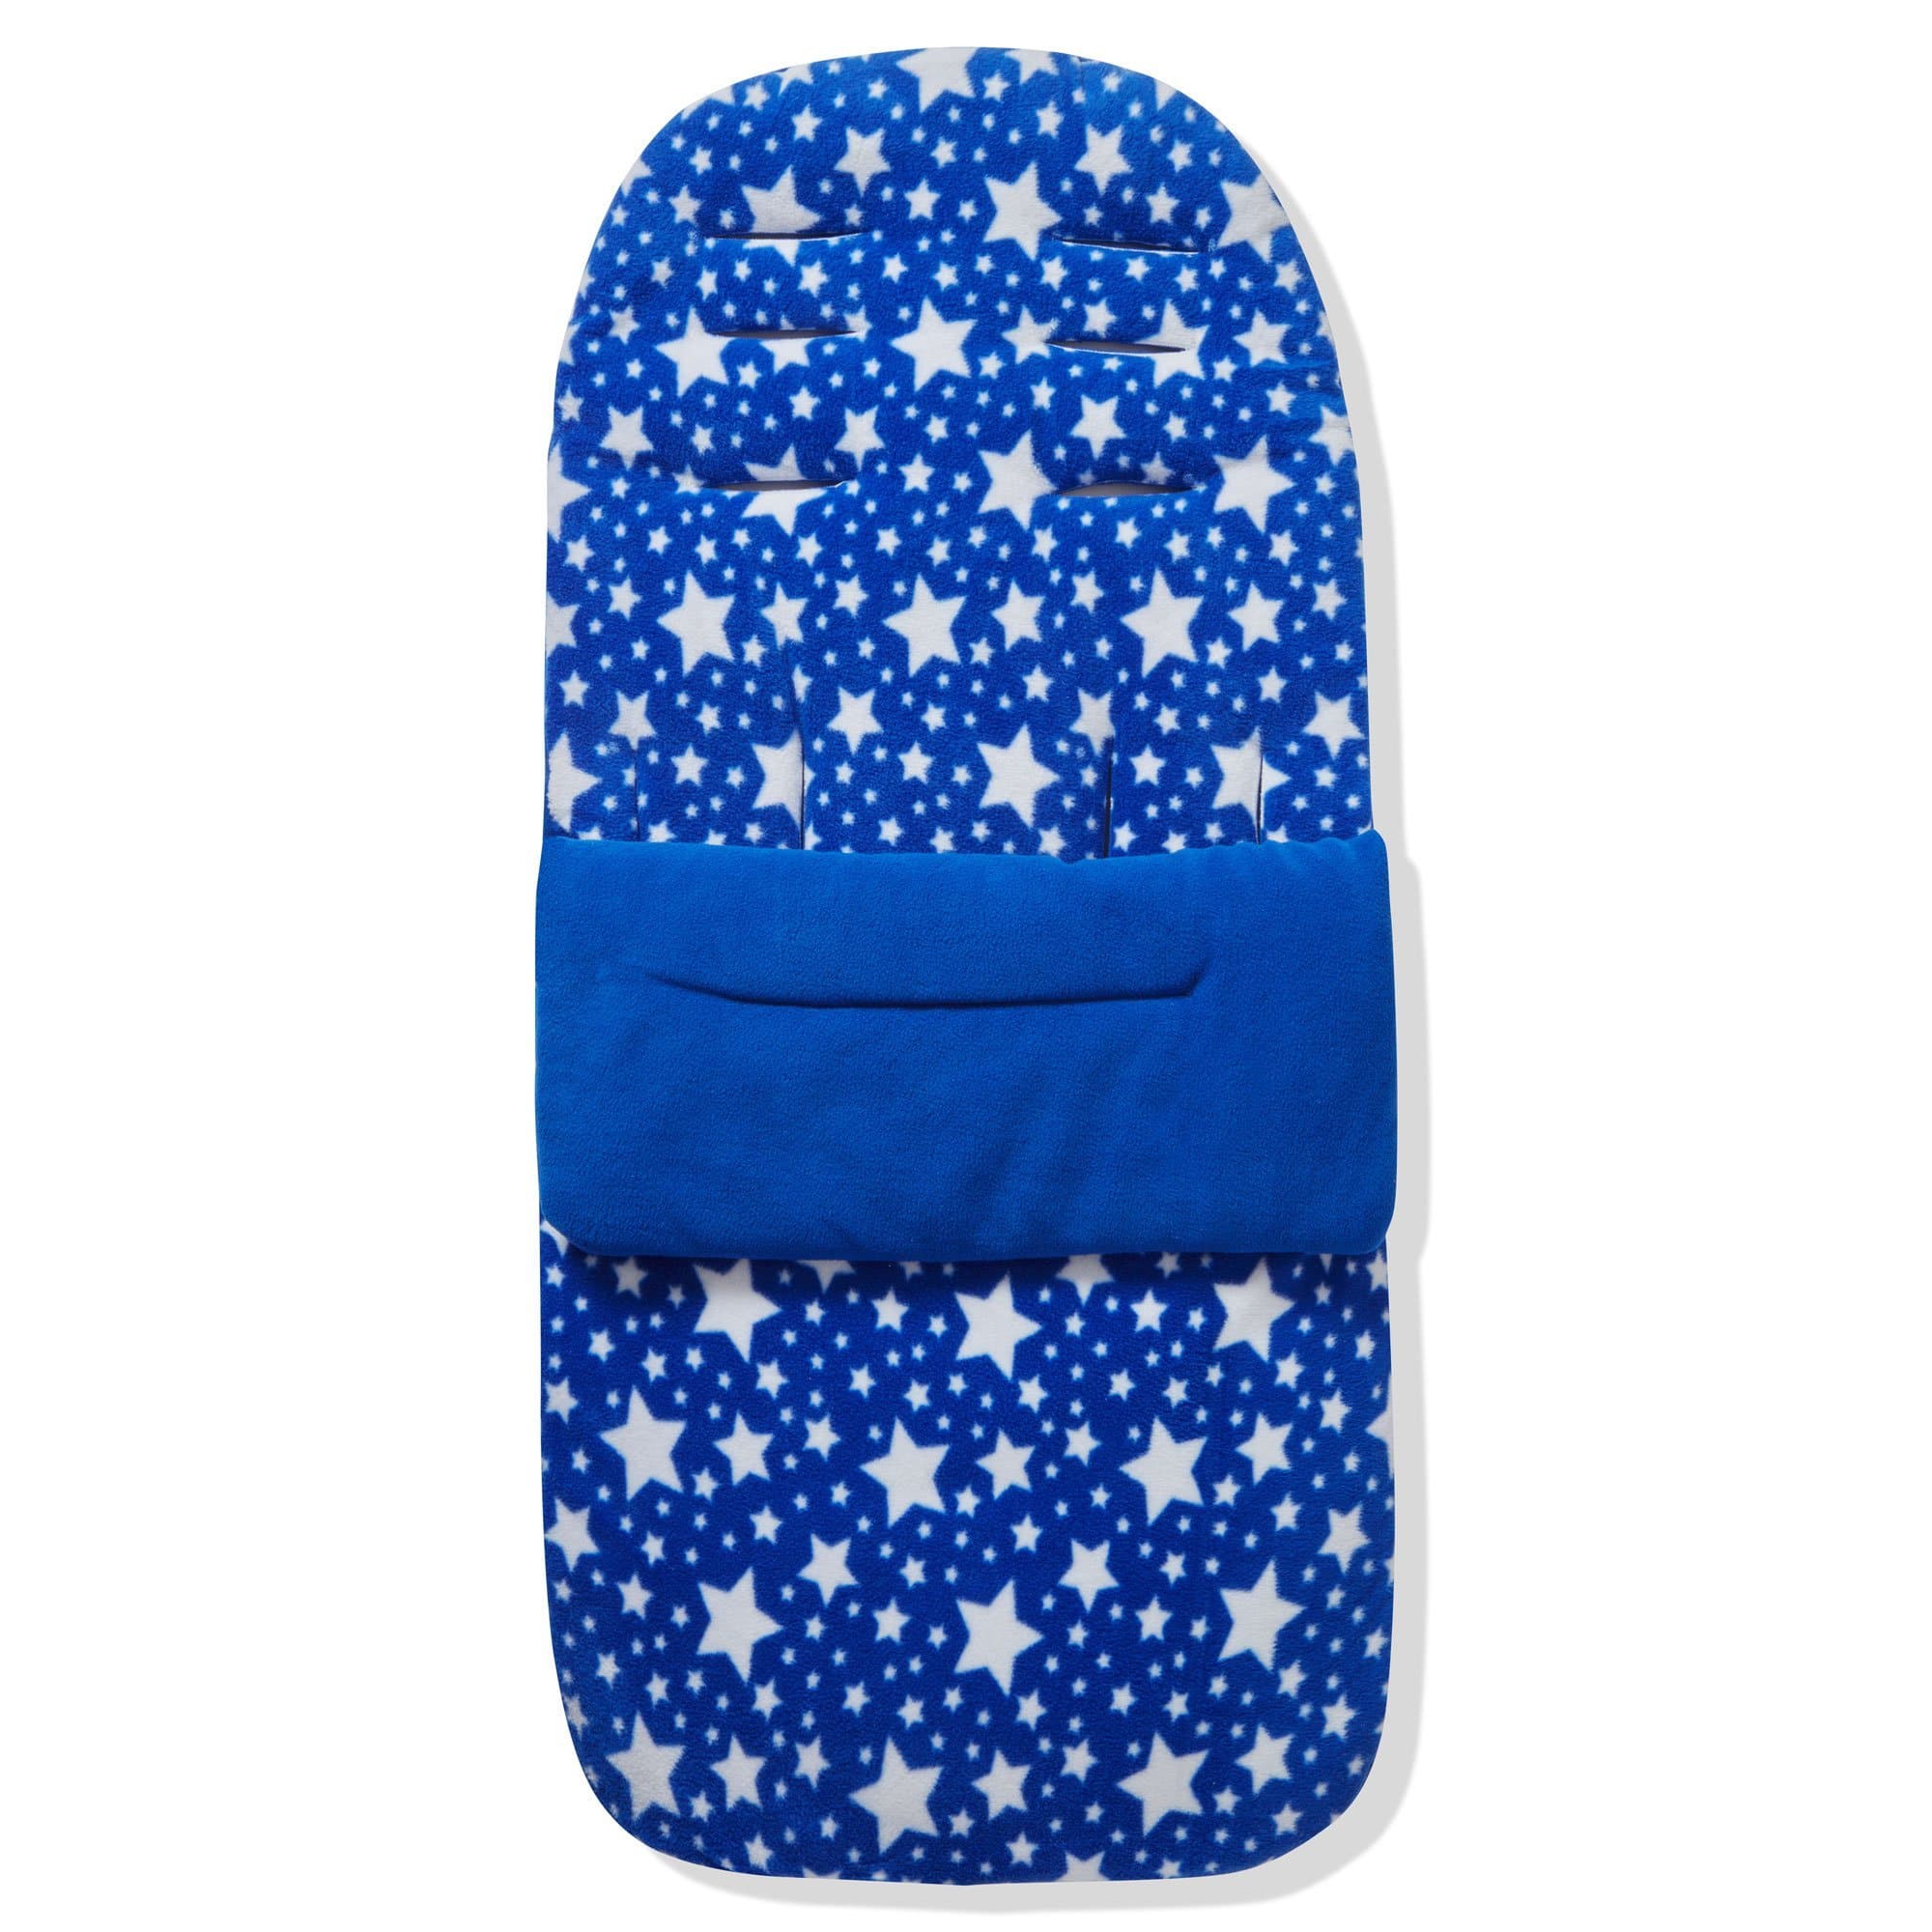 Fleece Footmuff / Cosy Toes Compatible with Uppababy - Blue Star / Fits All Models | For Your Little One